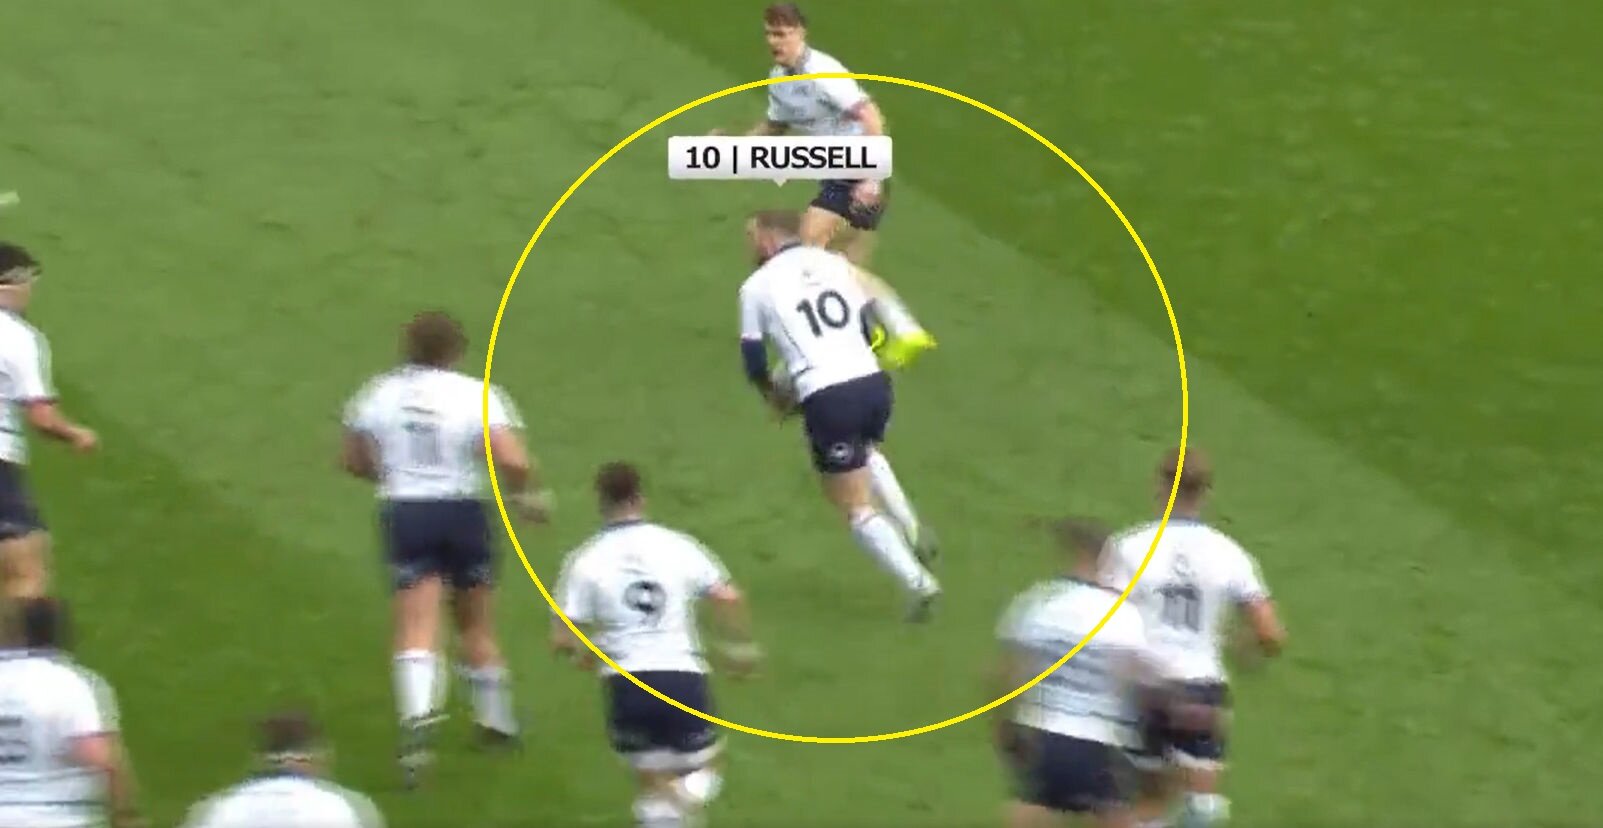 The 'uncomfortable' Finn Russell video that is going viral